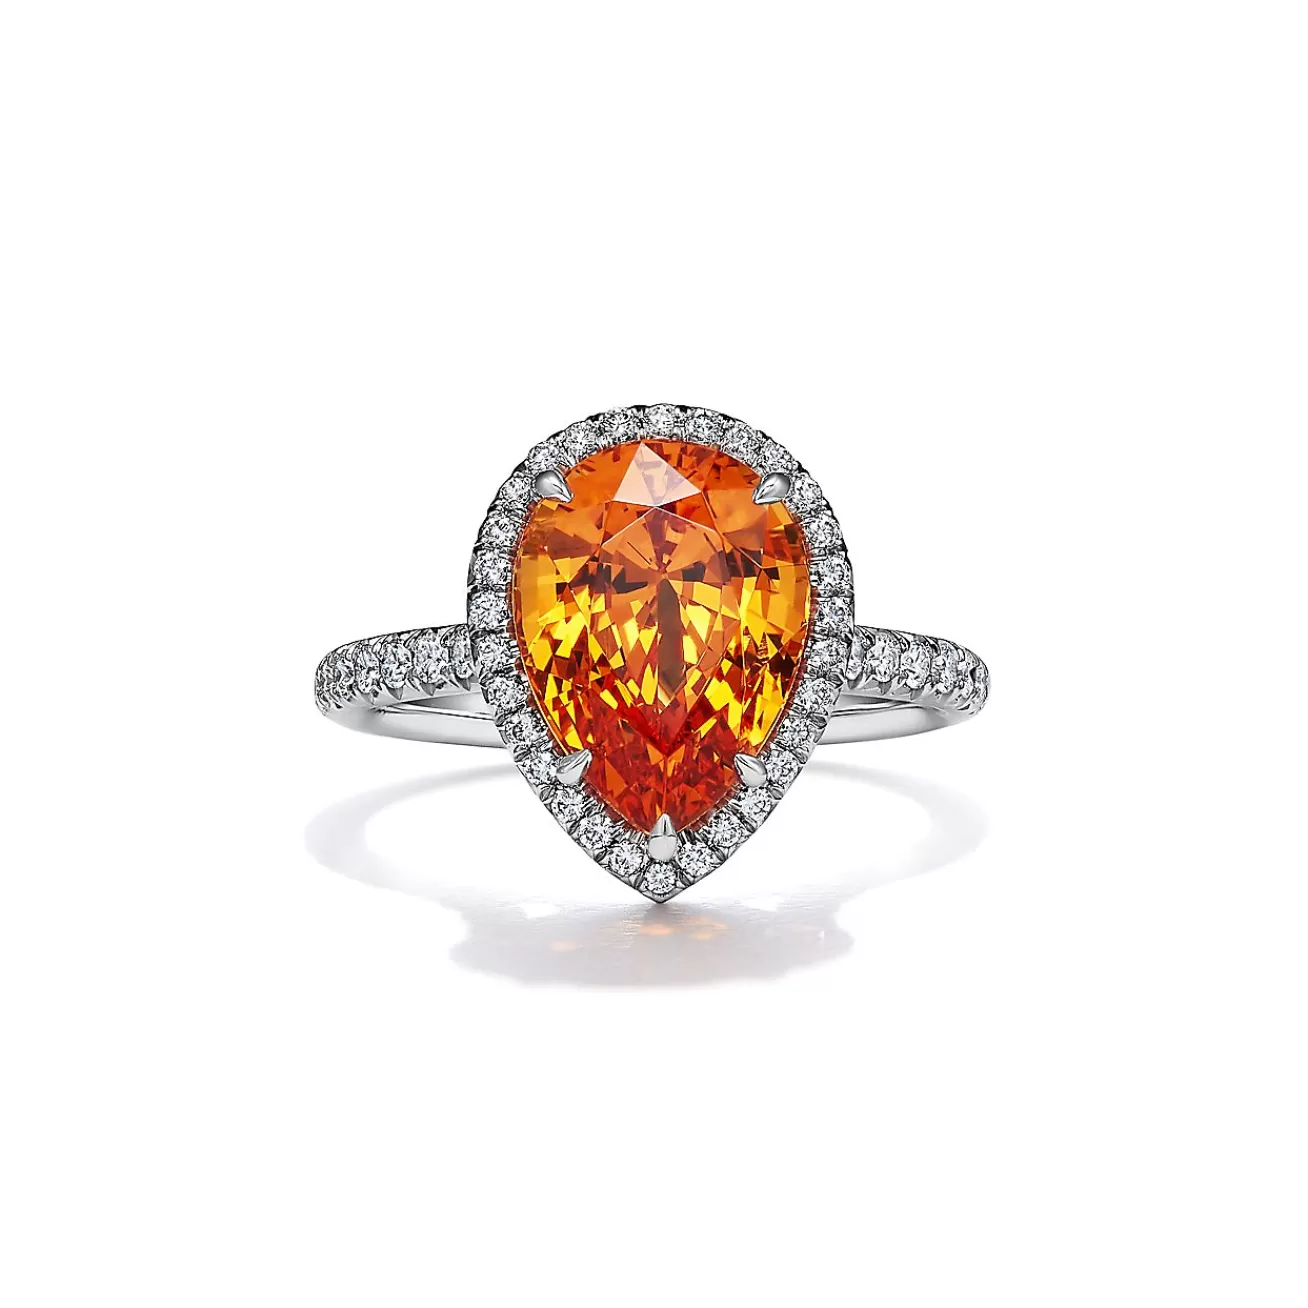 Tiffany & Co. Ring in Platinum with a Spessartine and Diamonds | ^ Rings | Diamond Jewelry